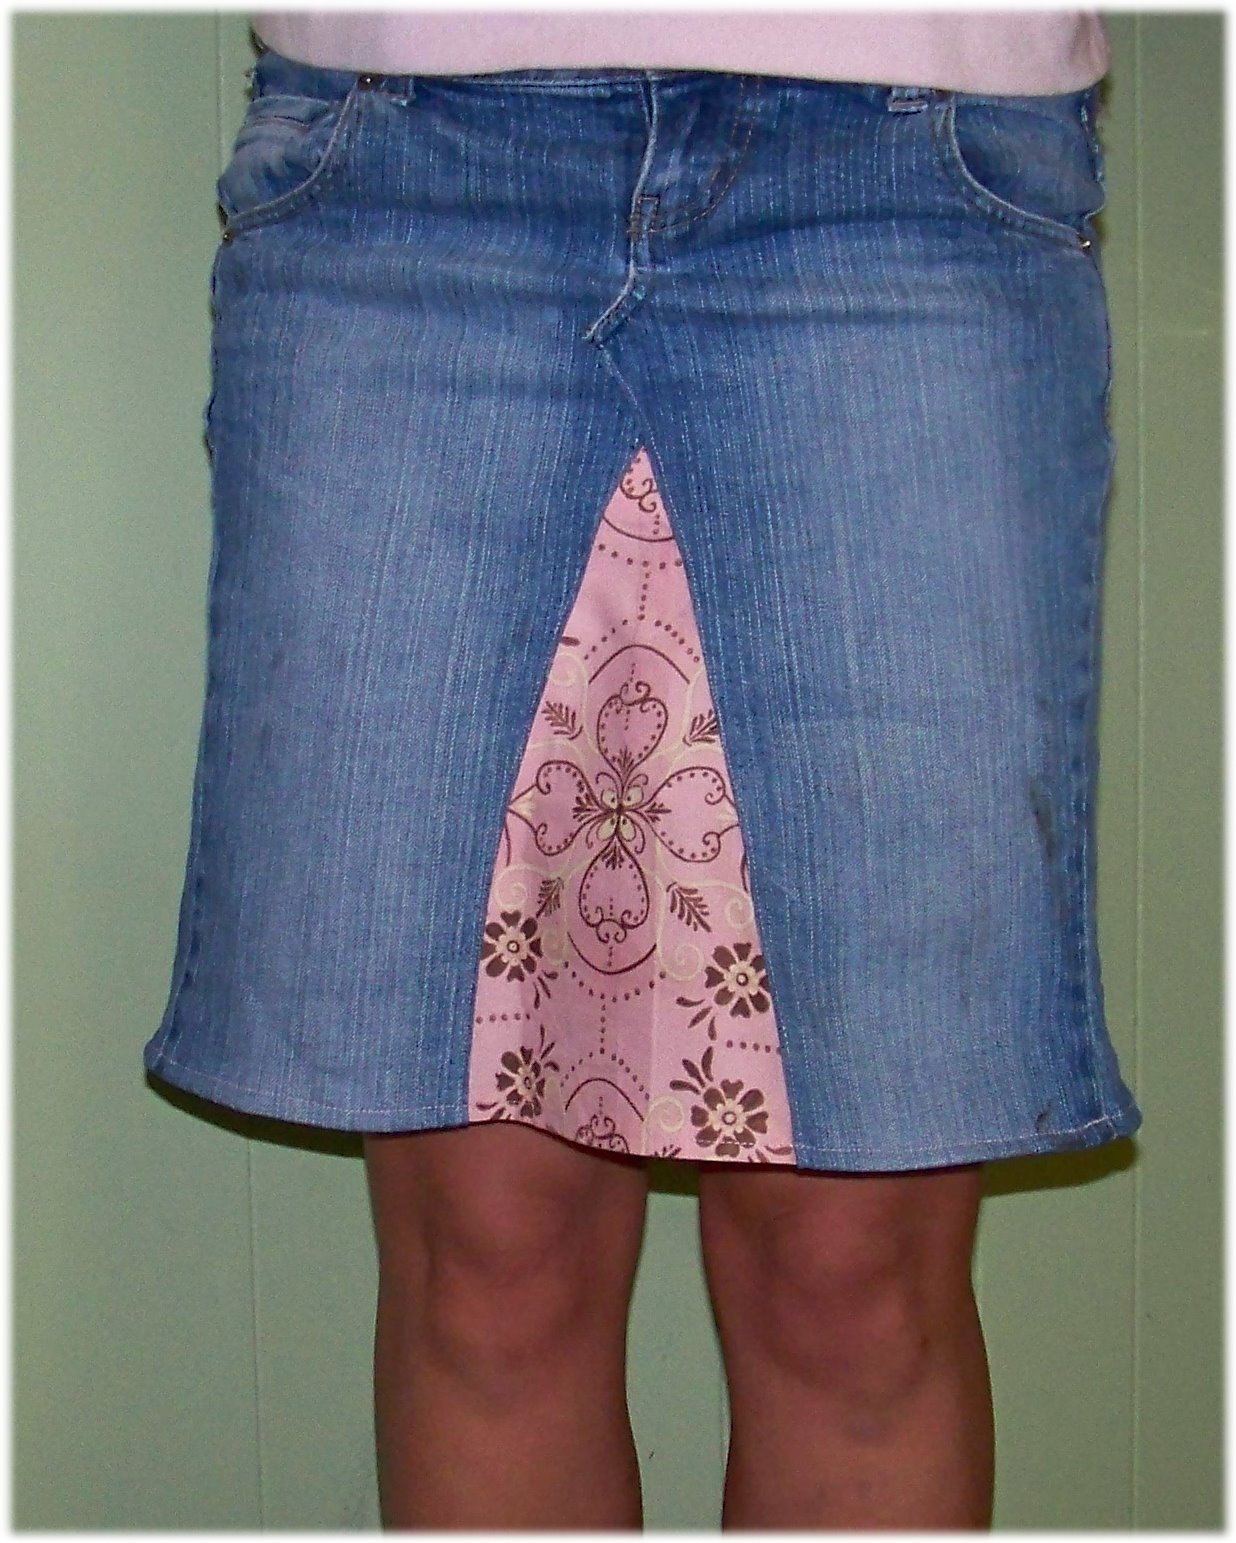 Turn Jeans Into A Skirt 83